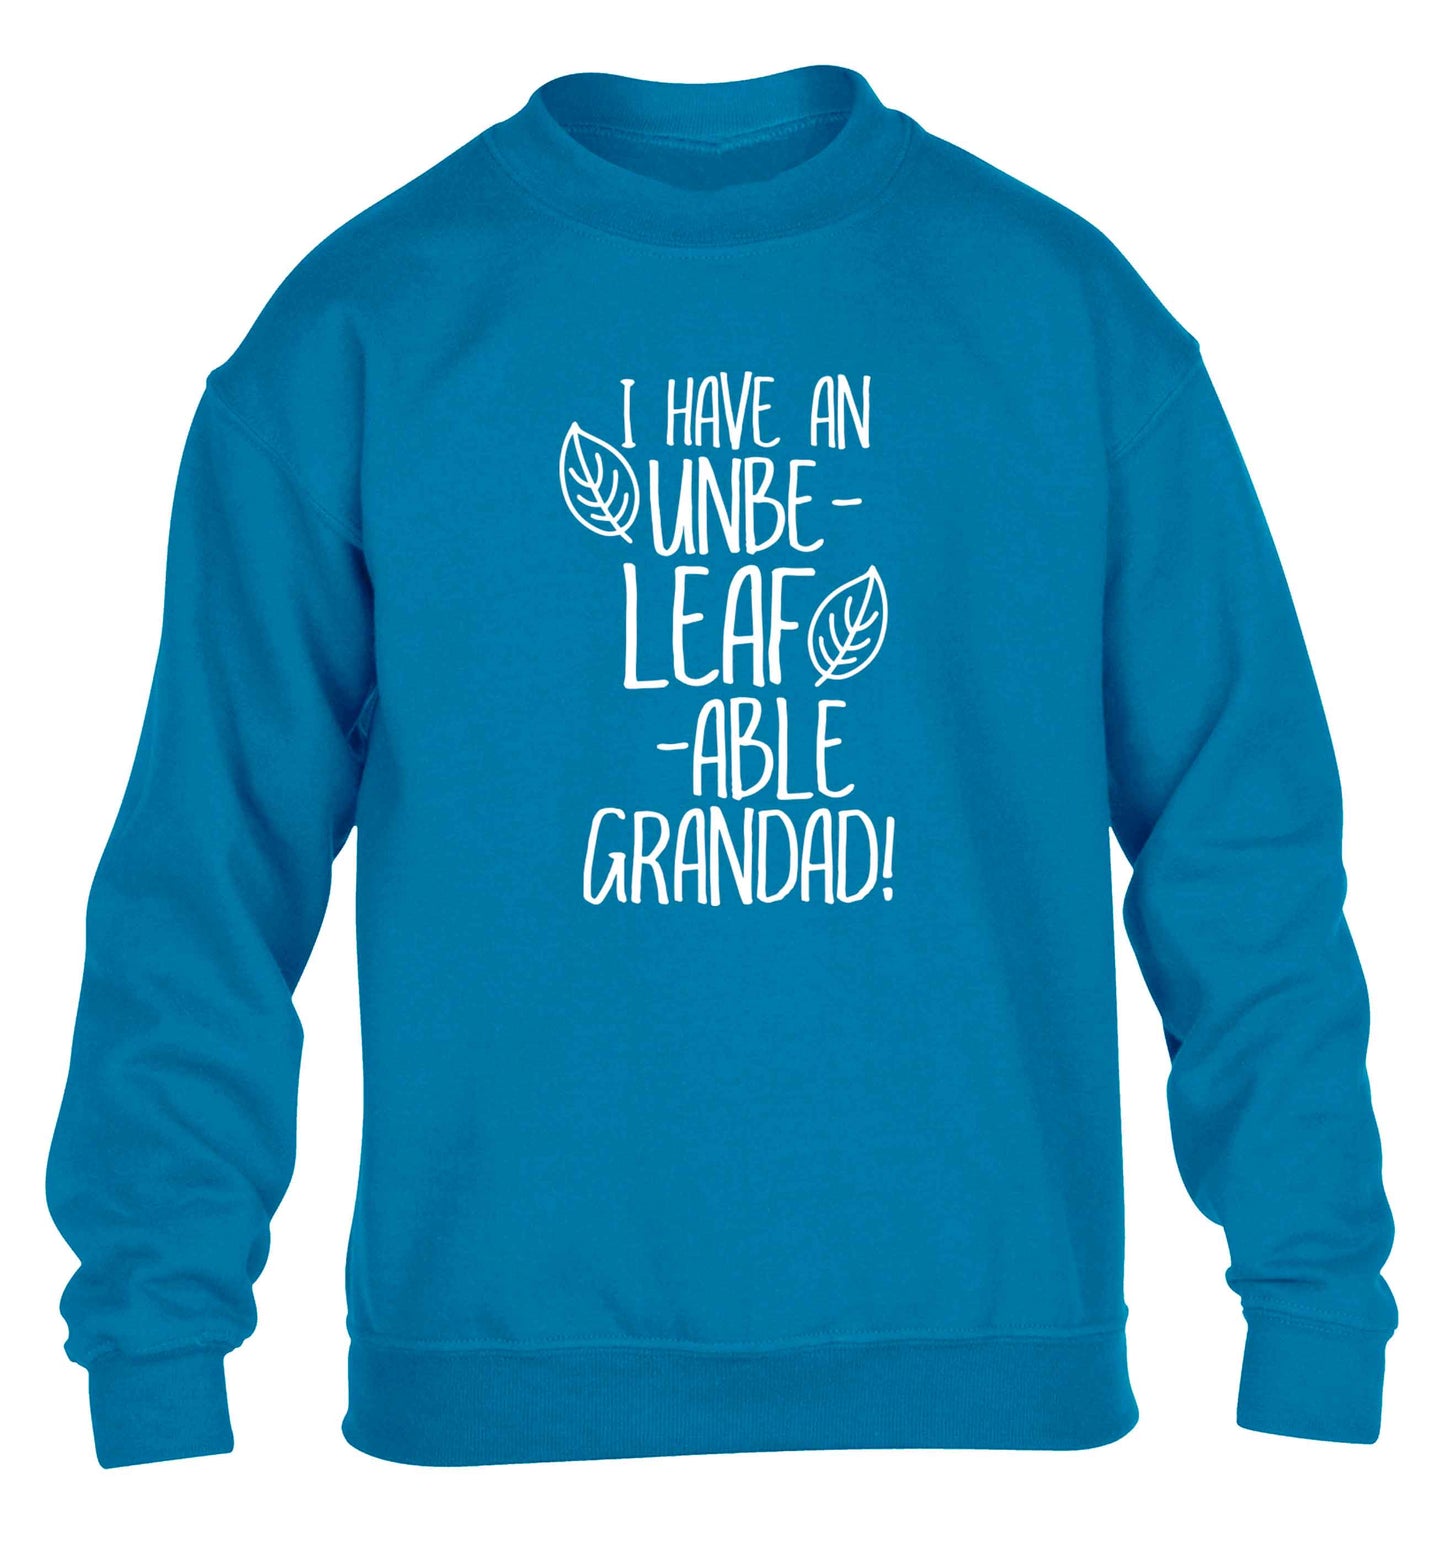 I have an unbe-leaf-able grandad children's blue sweater 12-13 Years